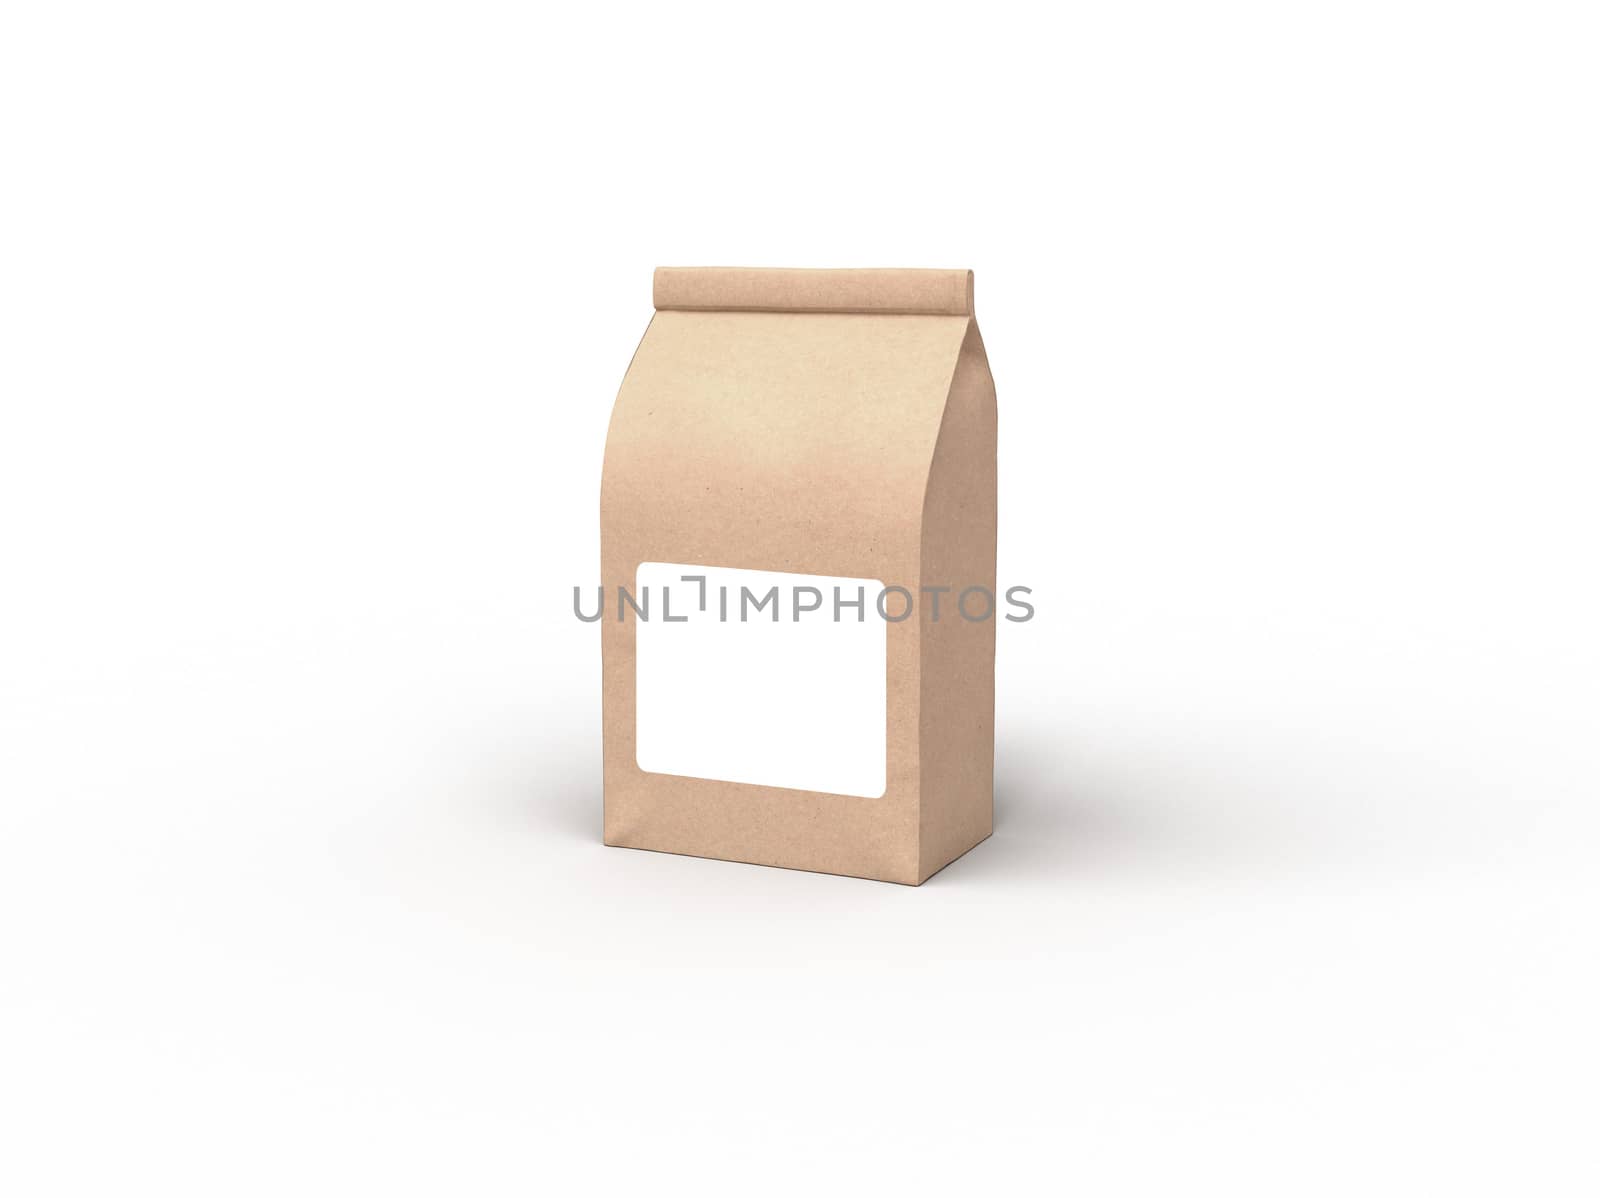 The coffee beam bag packaging mock-up design on white studio stage background